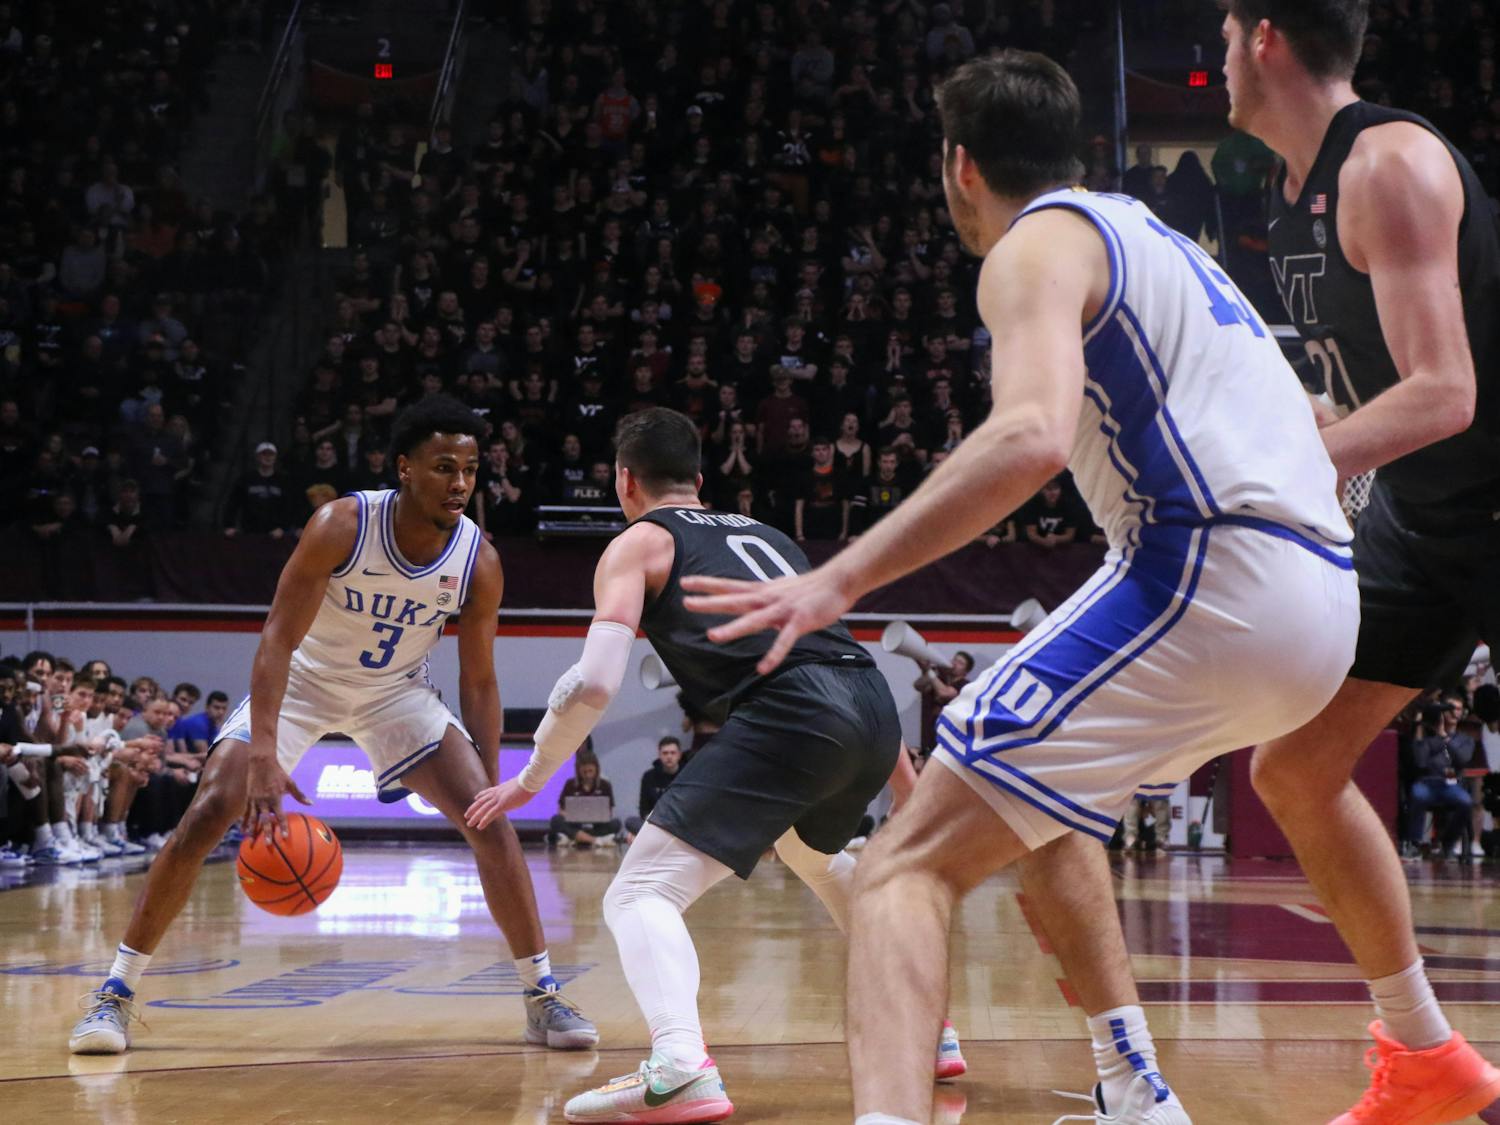 Jeremy Roach (3) dribbles during the first half of Duke's battle at Virginia Tech.